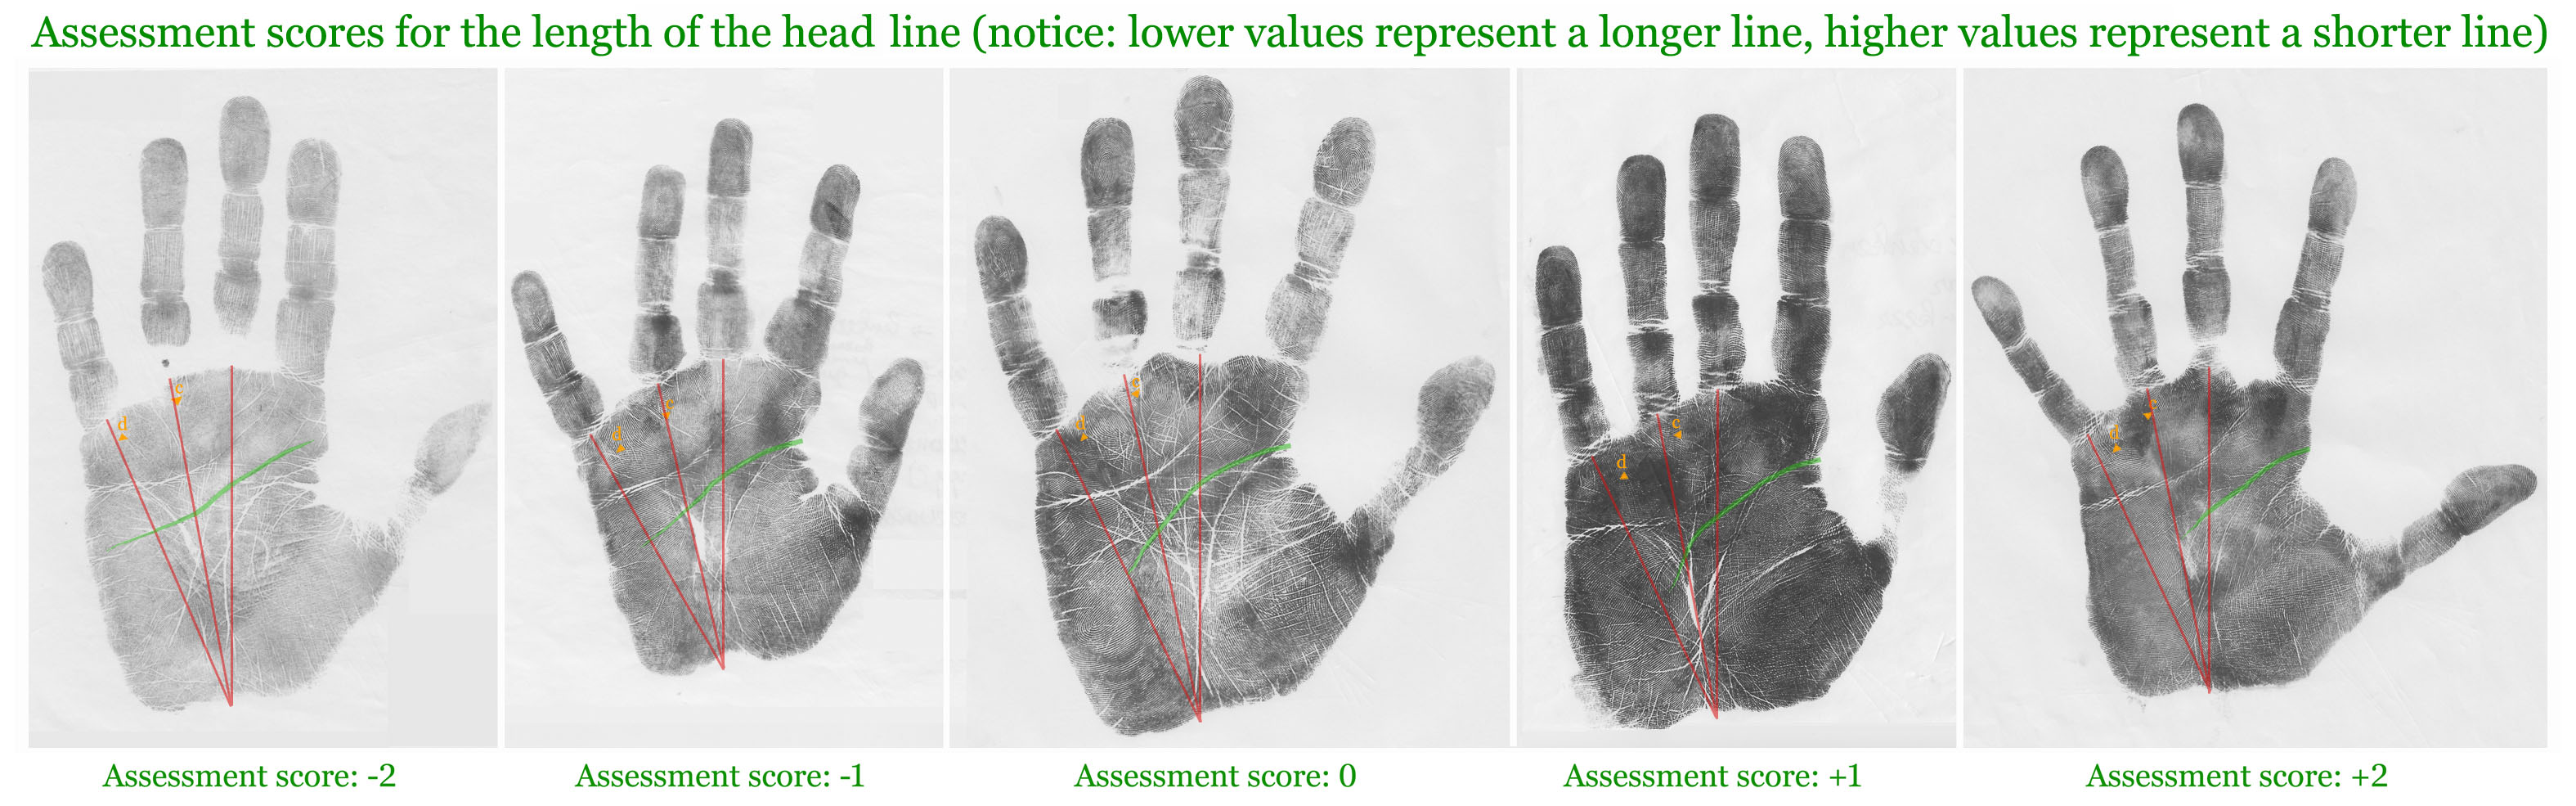 Assessment scores for the length of the head line [lower transverse crease].